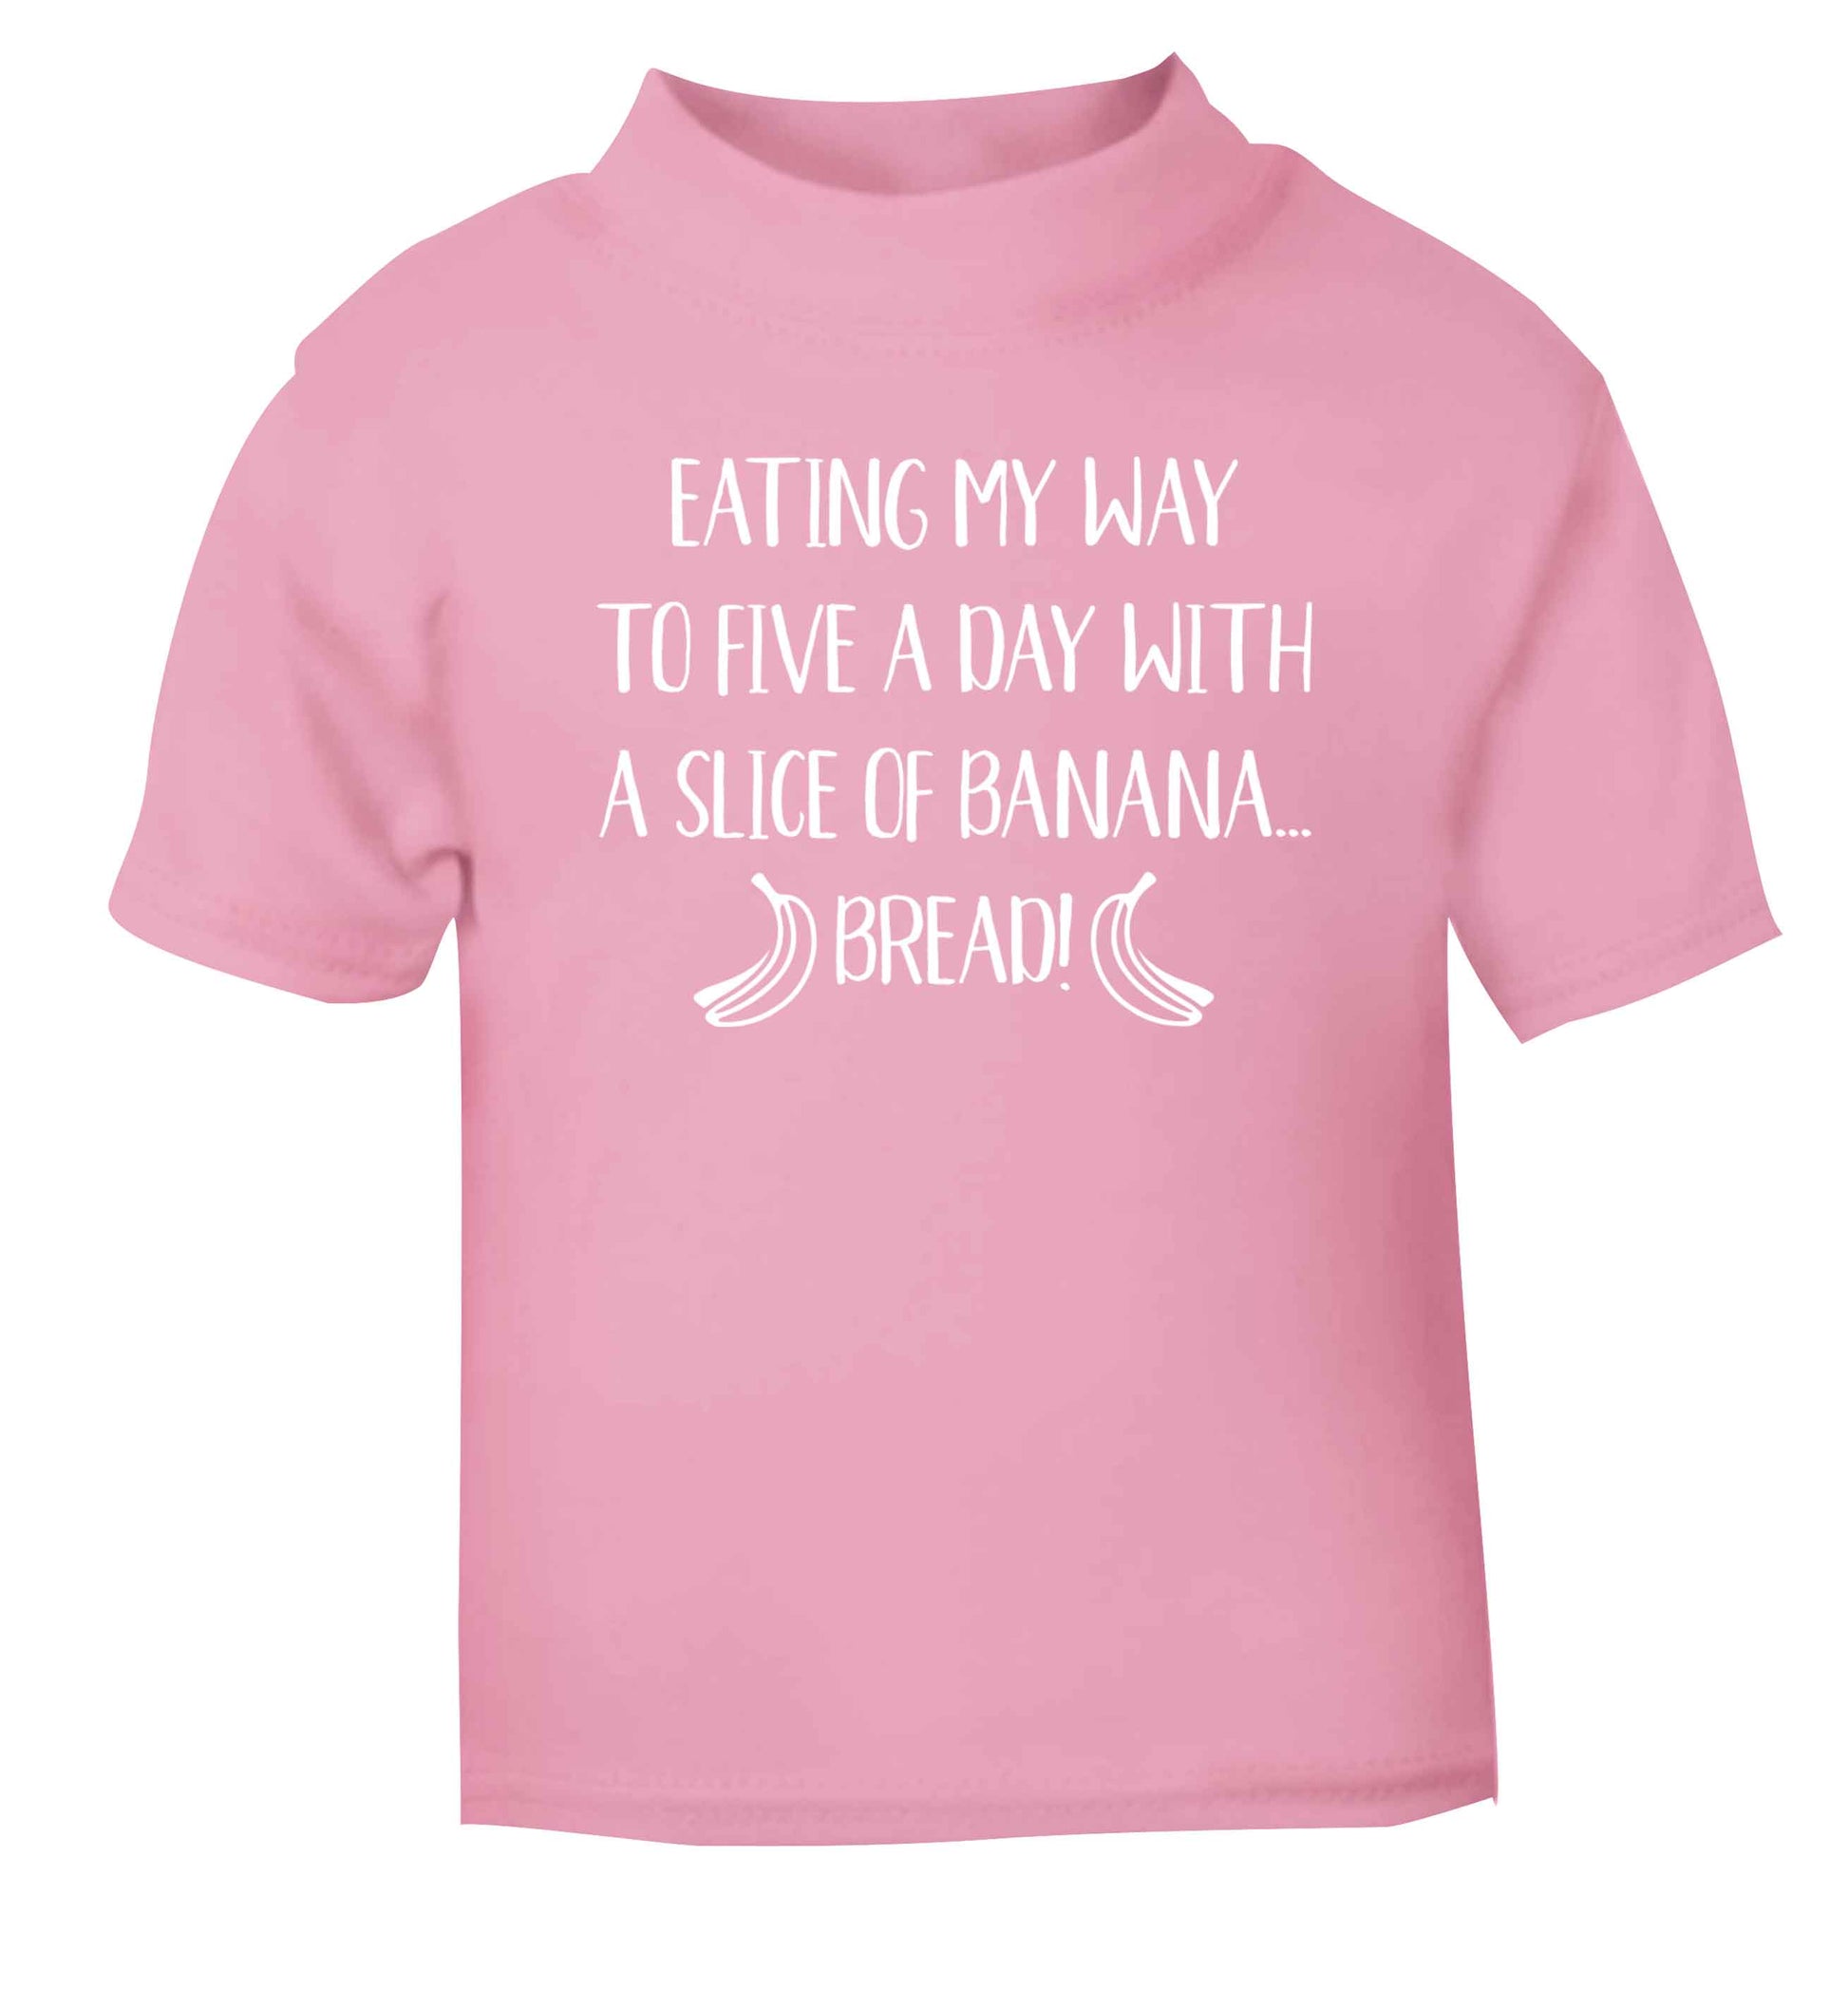 Eating my way to five a day with a slice of banana bread light pink Baby Toddler Tshirt 2 Years